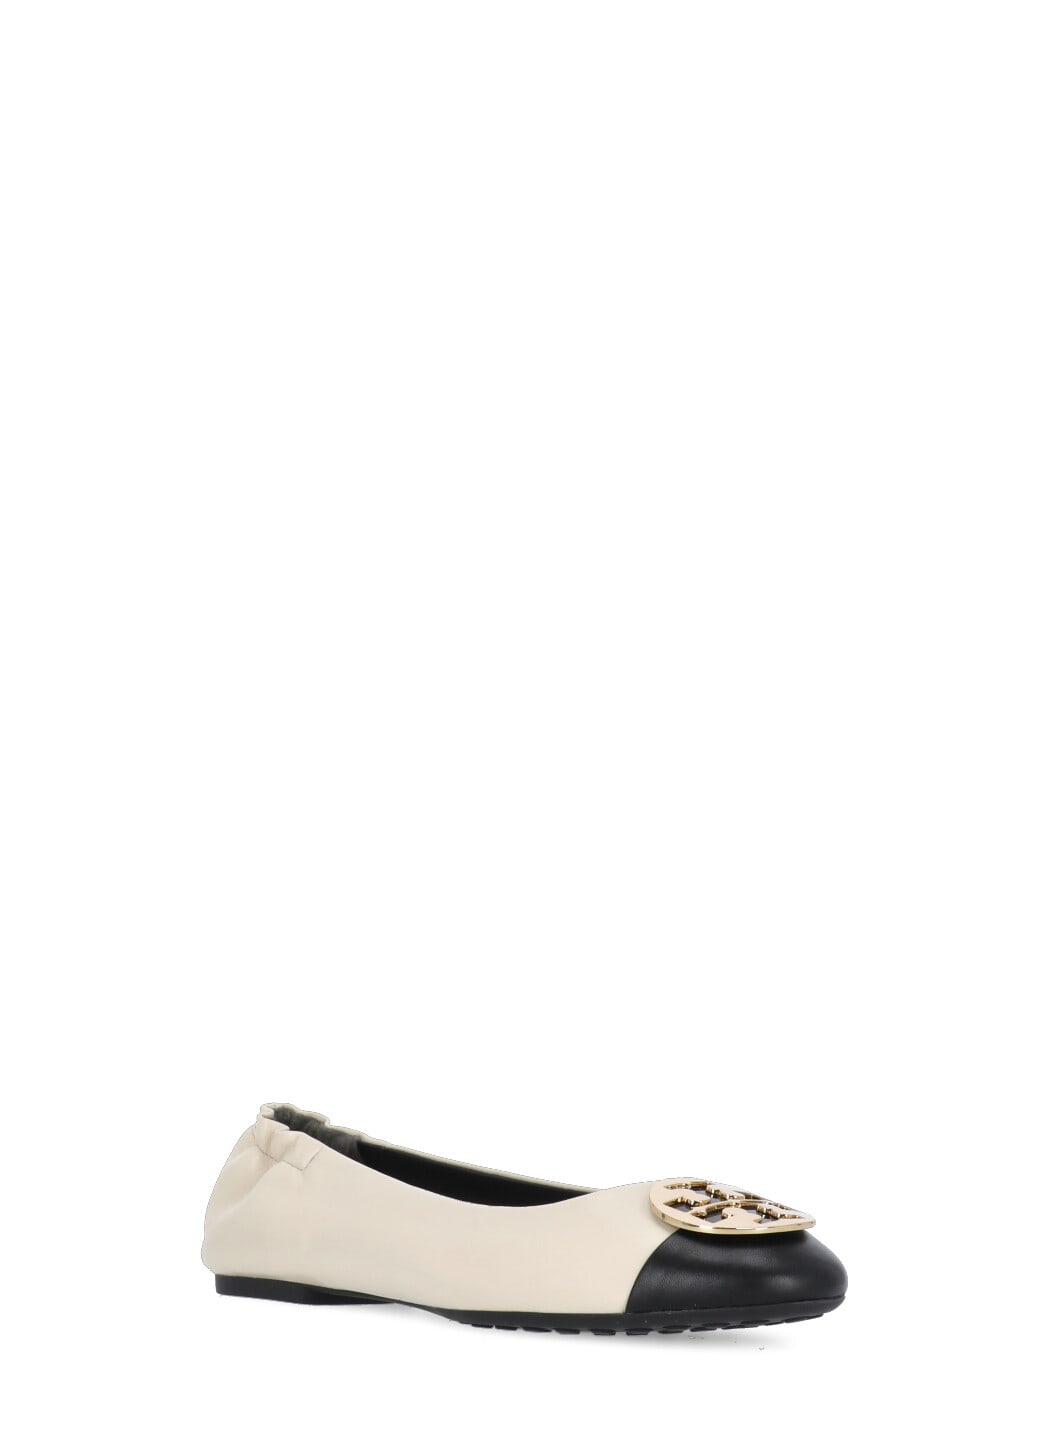 Shop Tory Burch Claire Ballerinas In Ivory